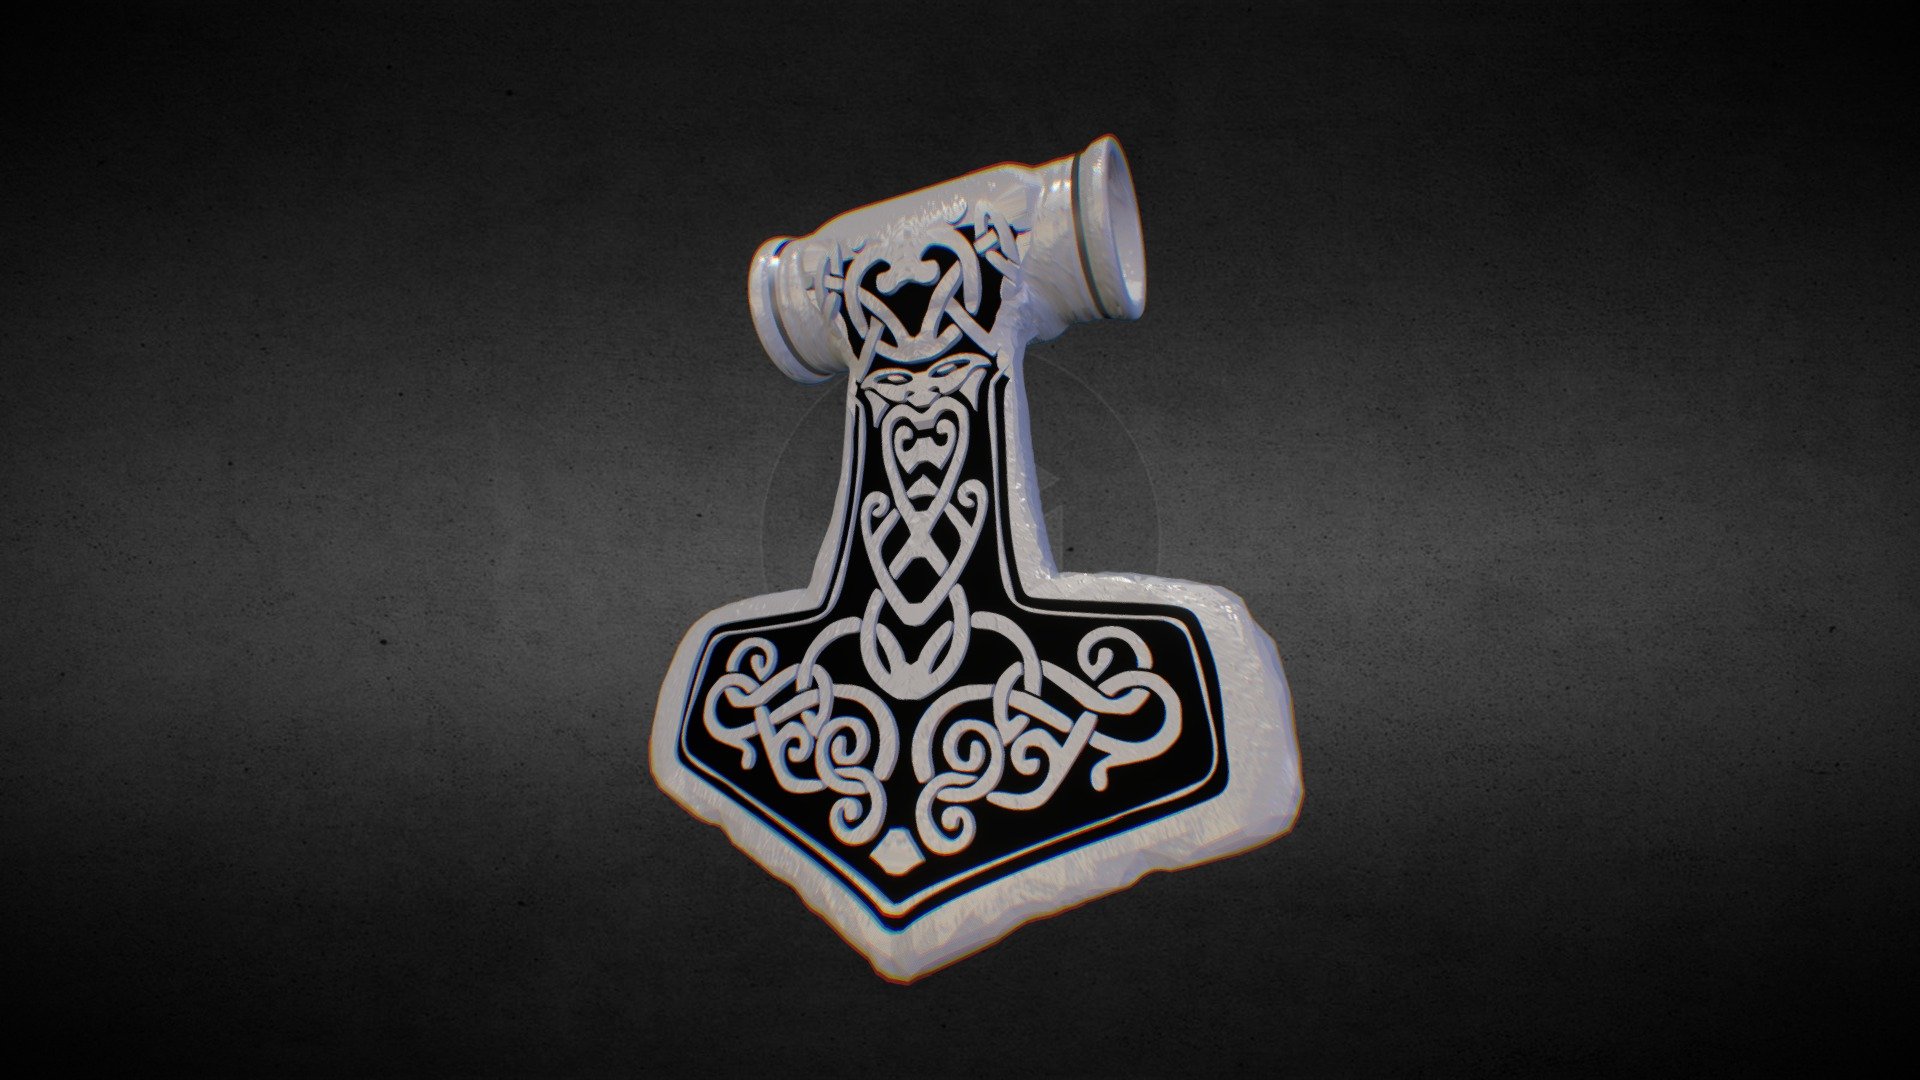 In Norse mythology, Mjölnir is the hammer of Thor, a major Norse god associated with thunder. Mjölnir is depicted in Norse mythology as one of the most fearsome weapons (from Wiki)

more at:
http://on.be.net/1AERNFS - Mjolnir - Thor's Hammer (Blender/Cycles) - 3D model by hxwaraa 3d model